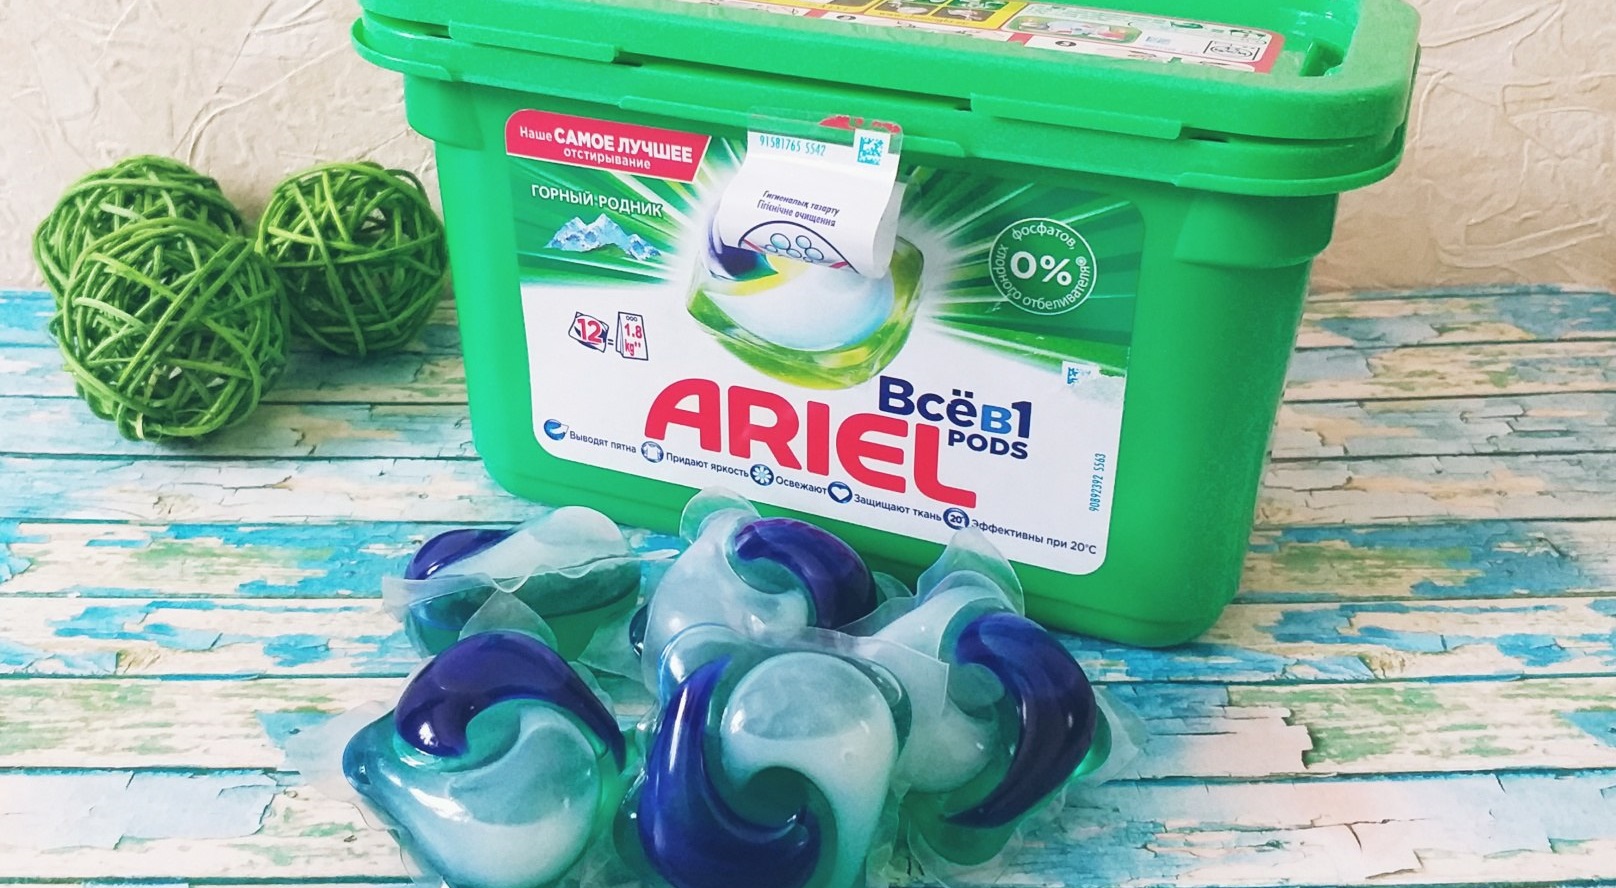 Ariel capsule Pods All-in-1 Mountain spring